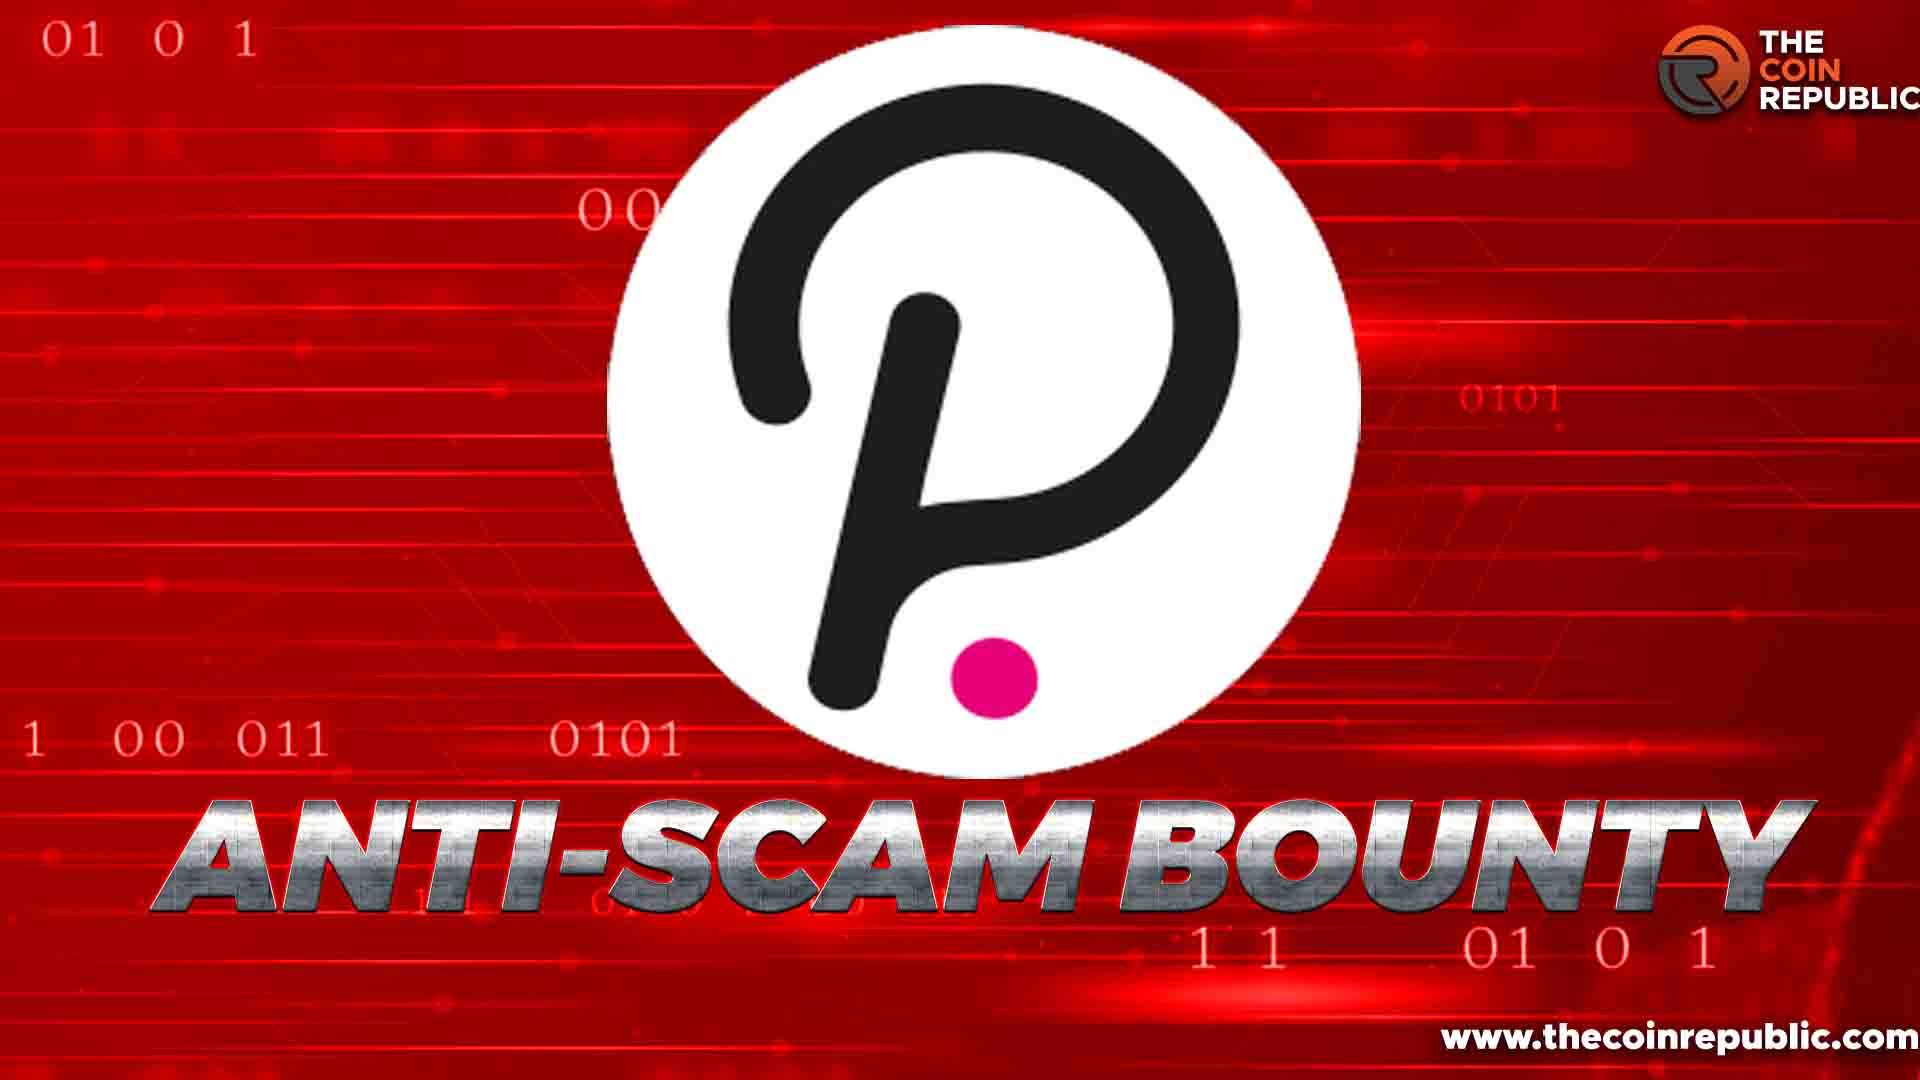 Polkadot encourages community to fight scams via “anti-scam” initiative